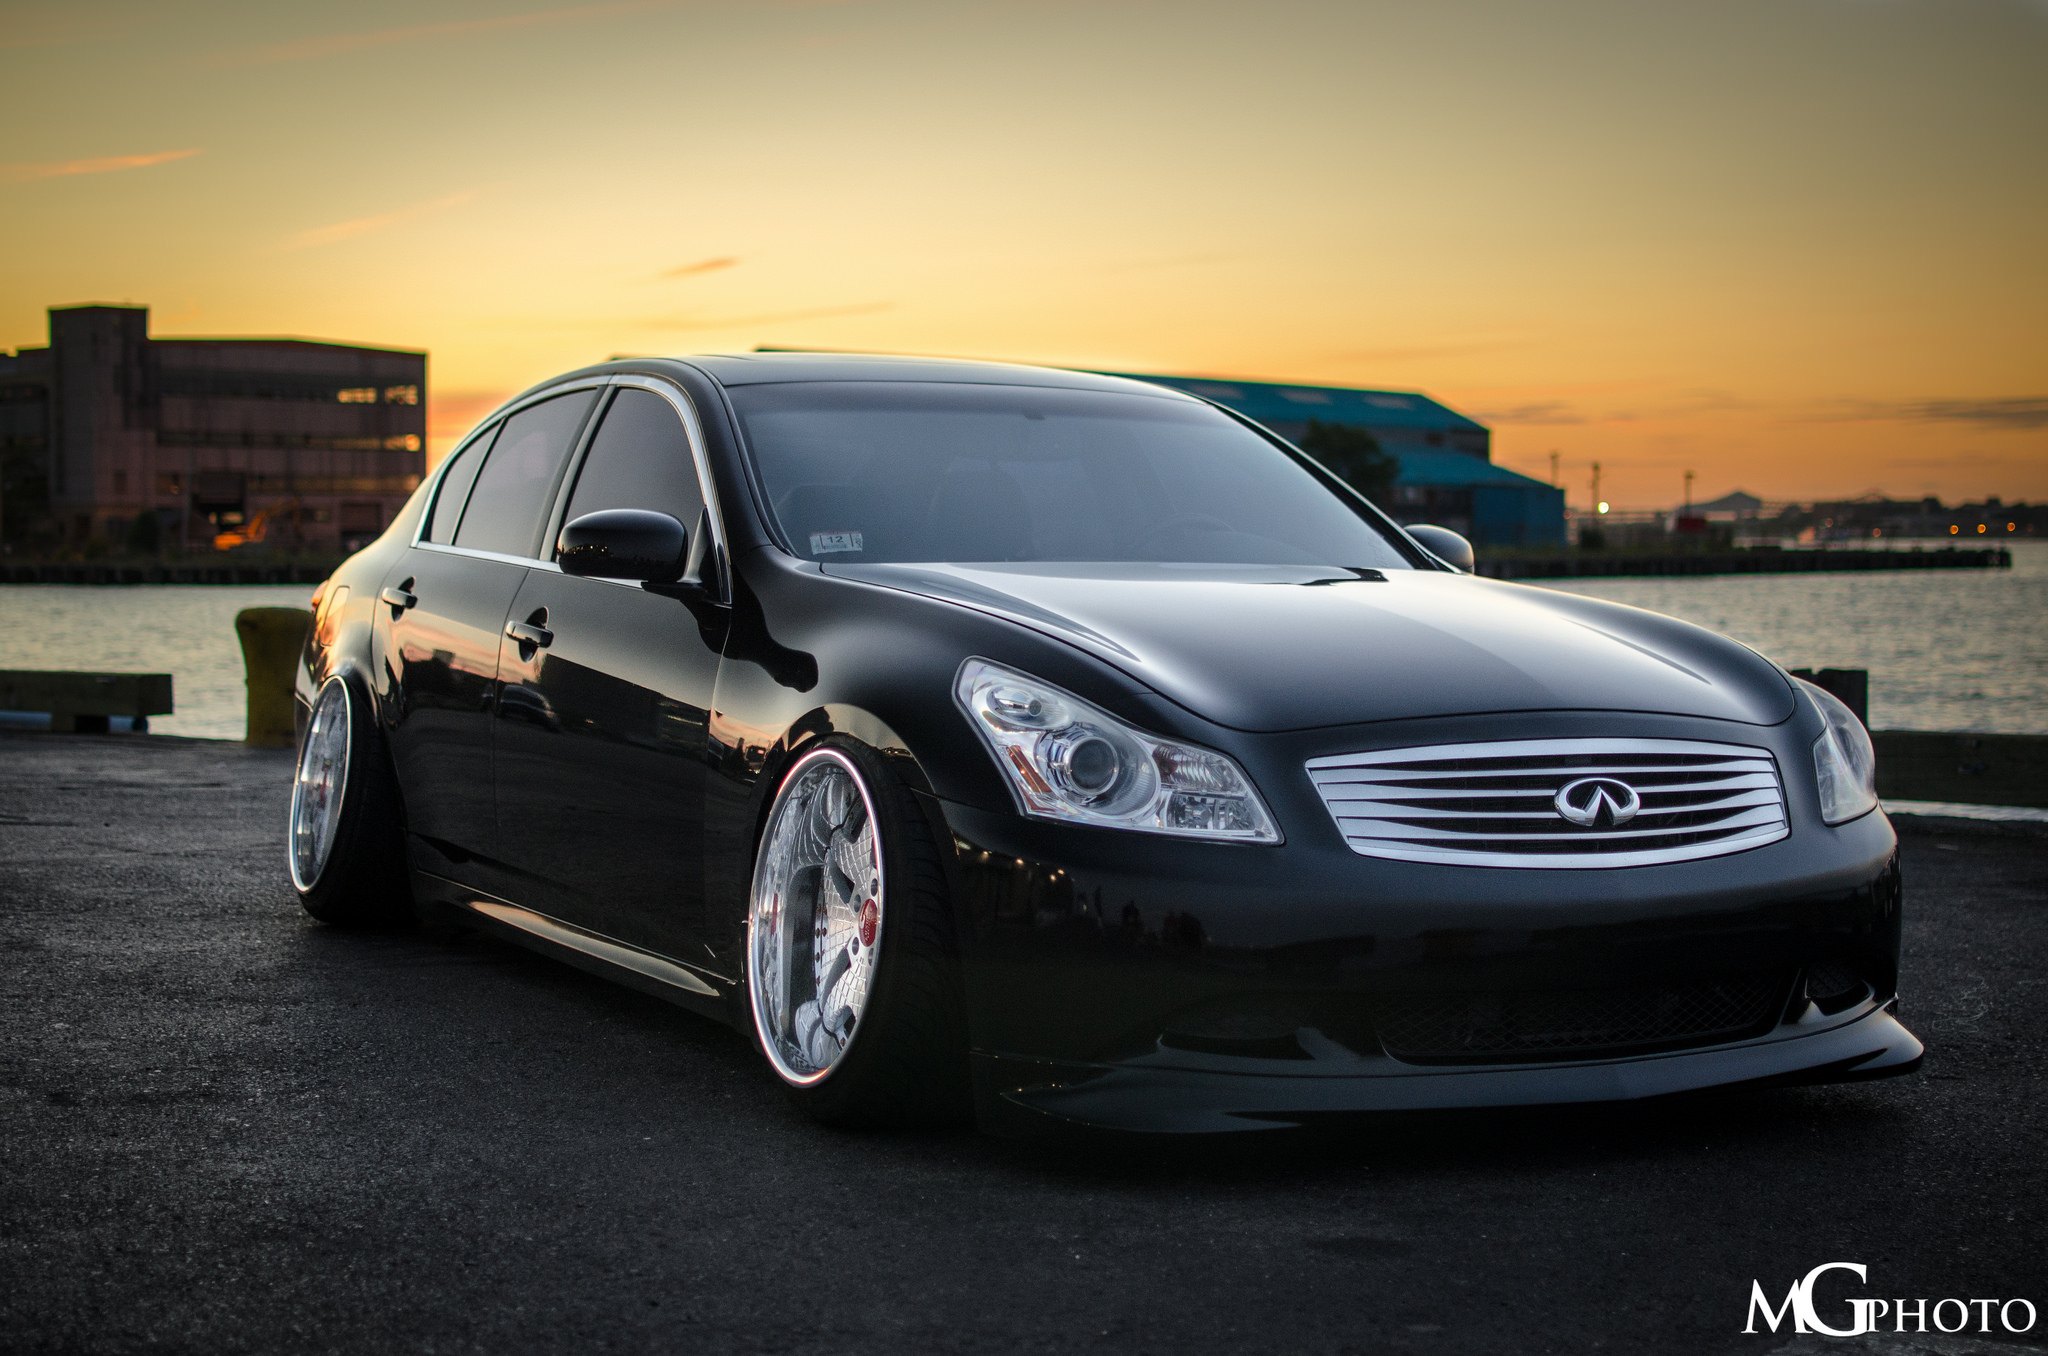 Front Bumper with Fog Lights on Black Stancd Infiniti G37e - Photo by Matthew Gaumont